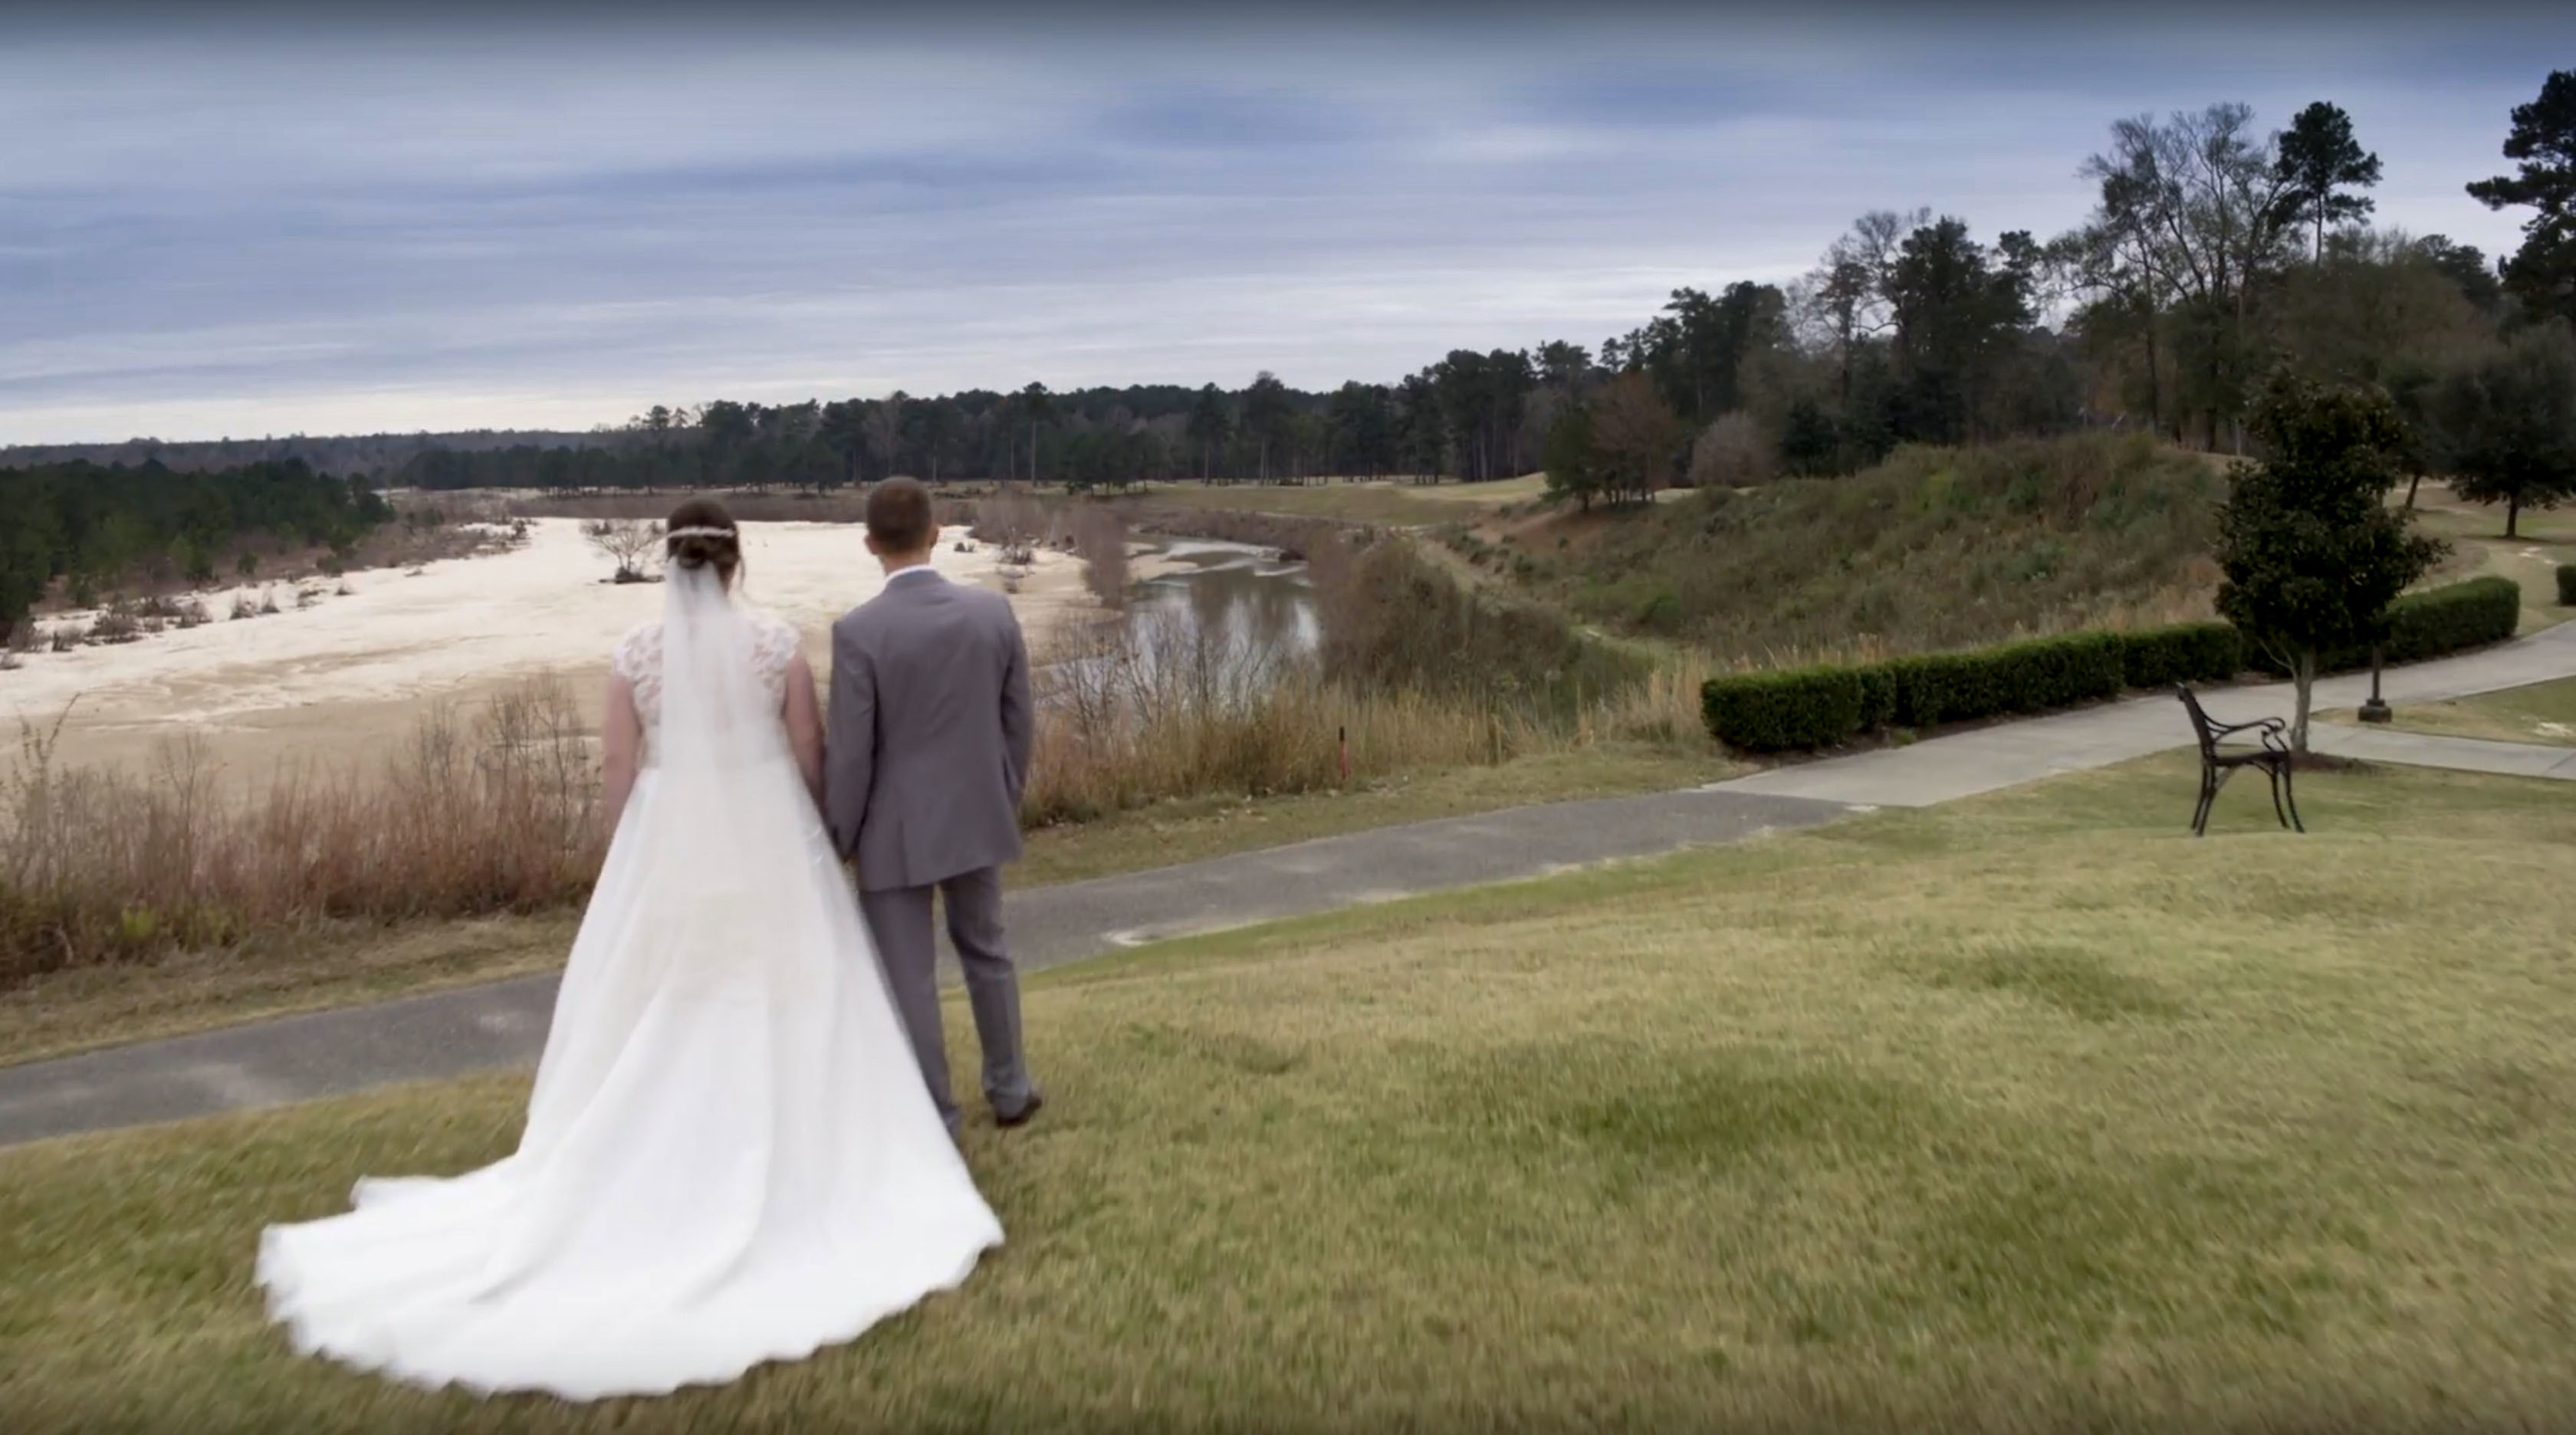 Client - Anna & Paul Wedding, Location - The Bluffs at St. Francisville, Date - December 30, 2017